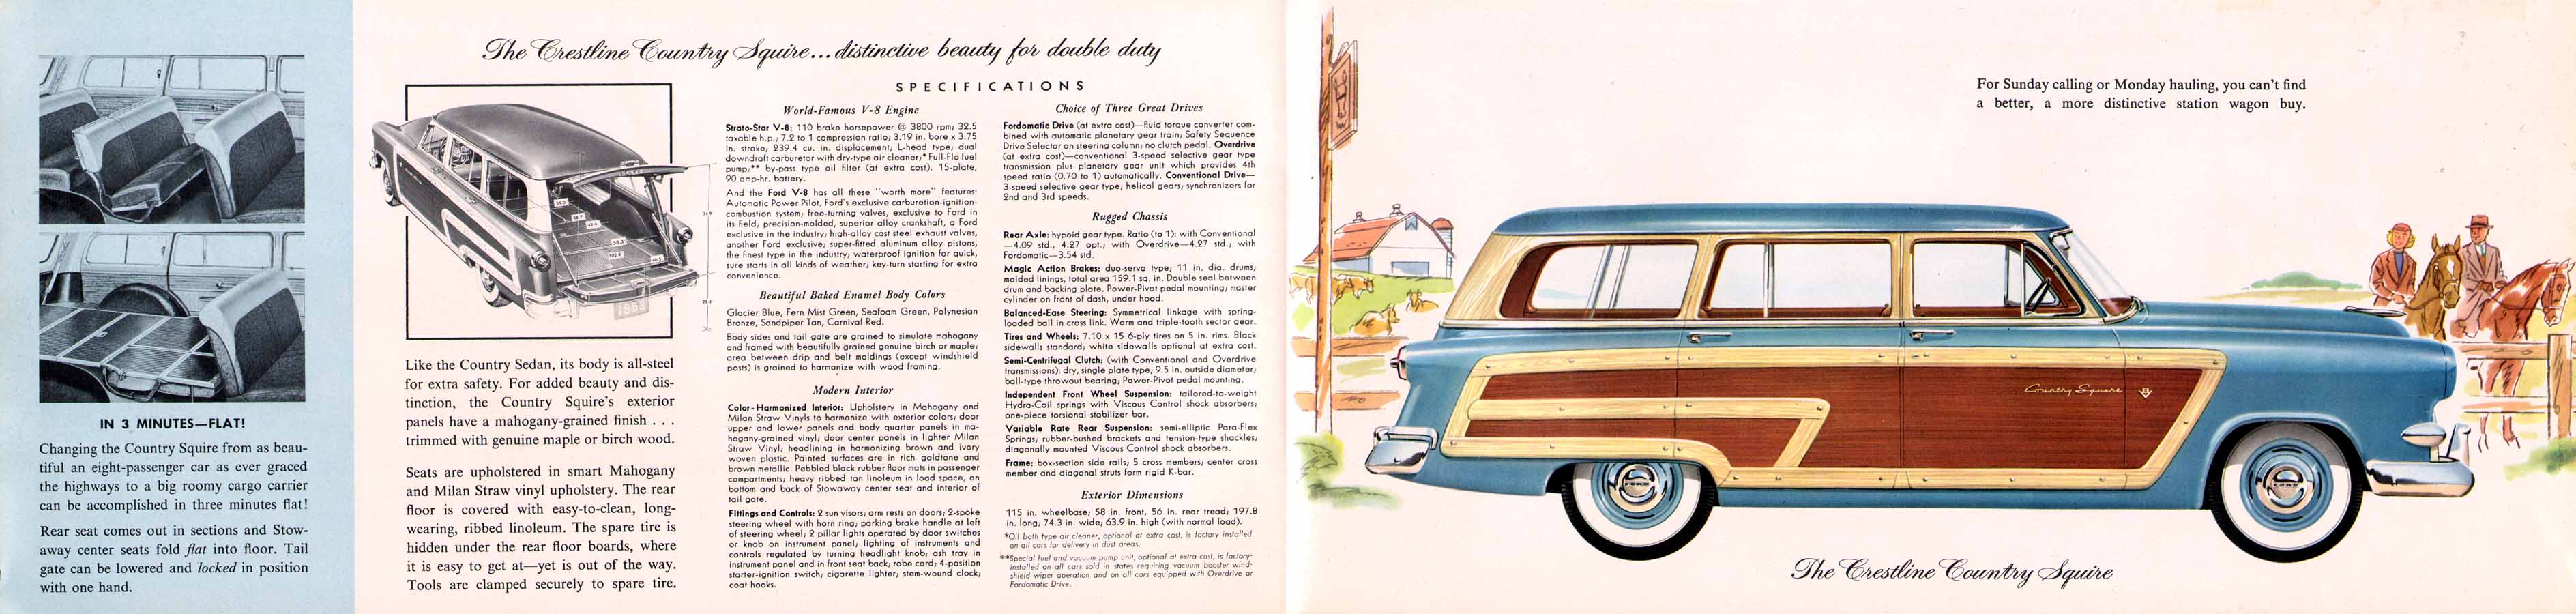 1953_Ford-24-25